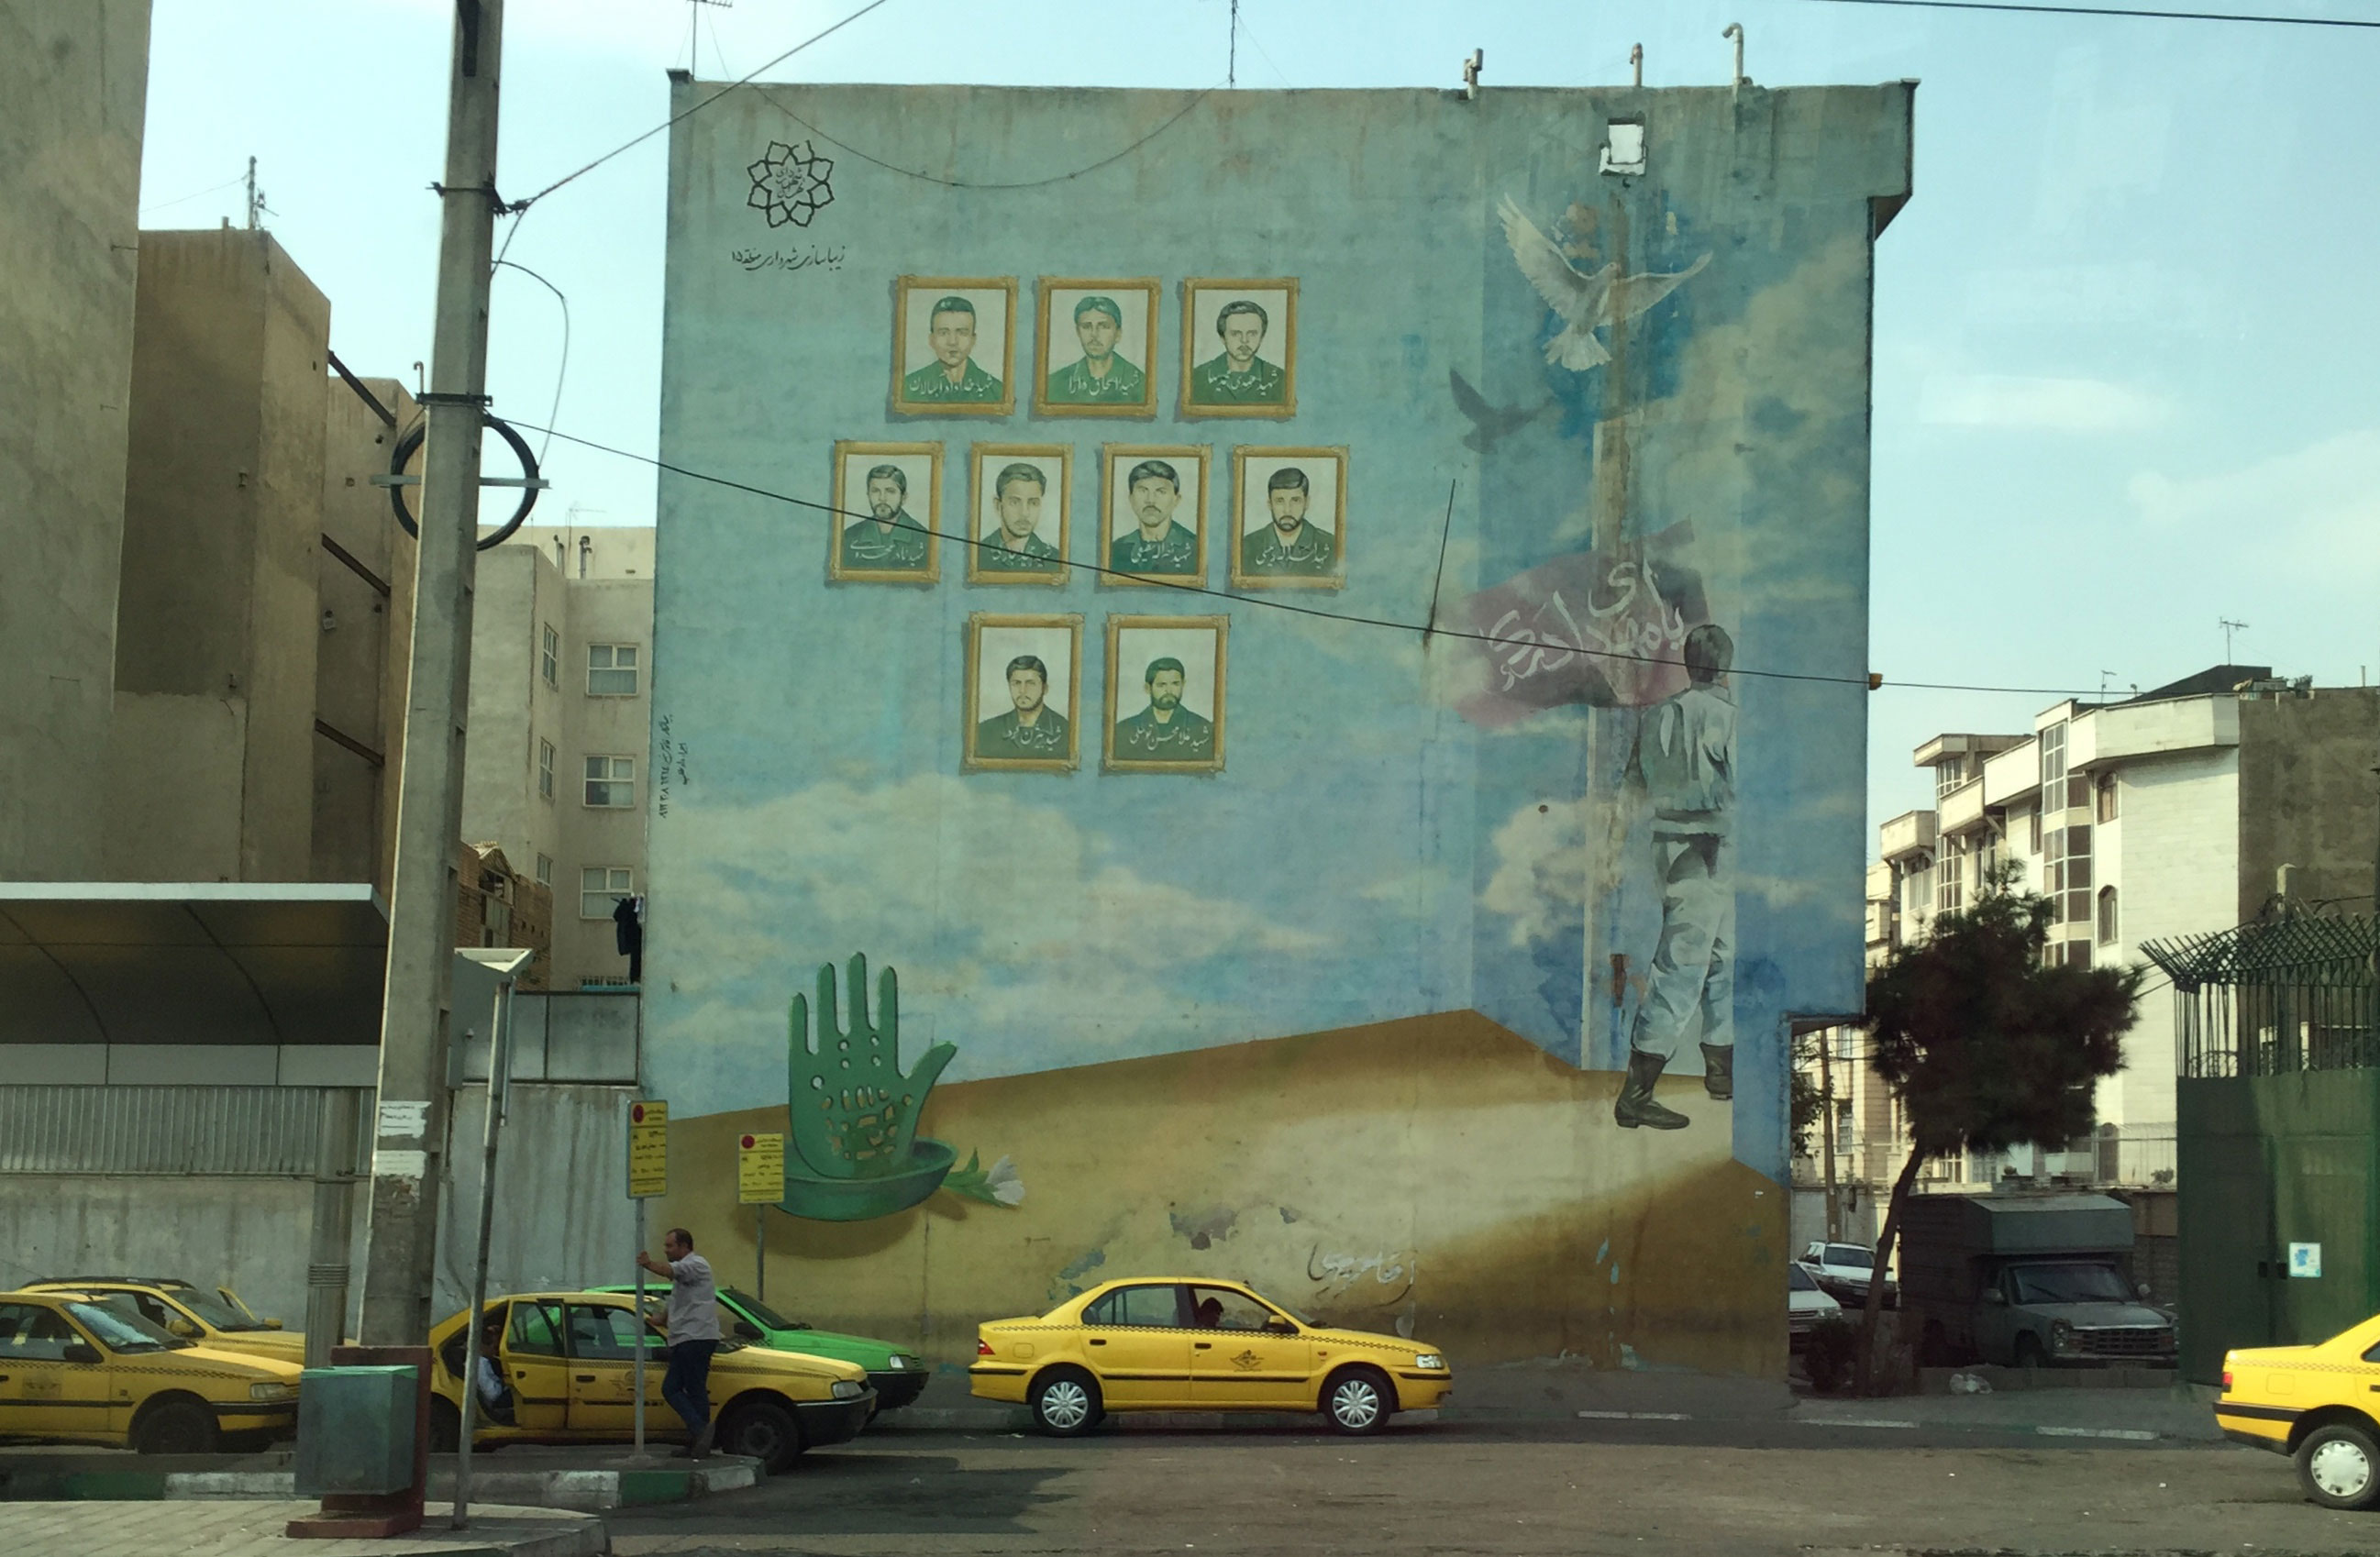 In south Tehran taxis are parked beneath a mural depicting martyrs killed in the Iran-Iraq war (1980-88). Over 30 years after the war ended, such murals are still common in cities across Iran.